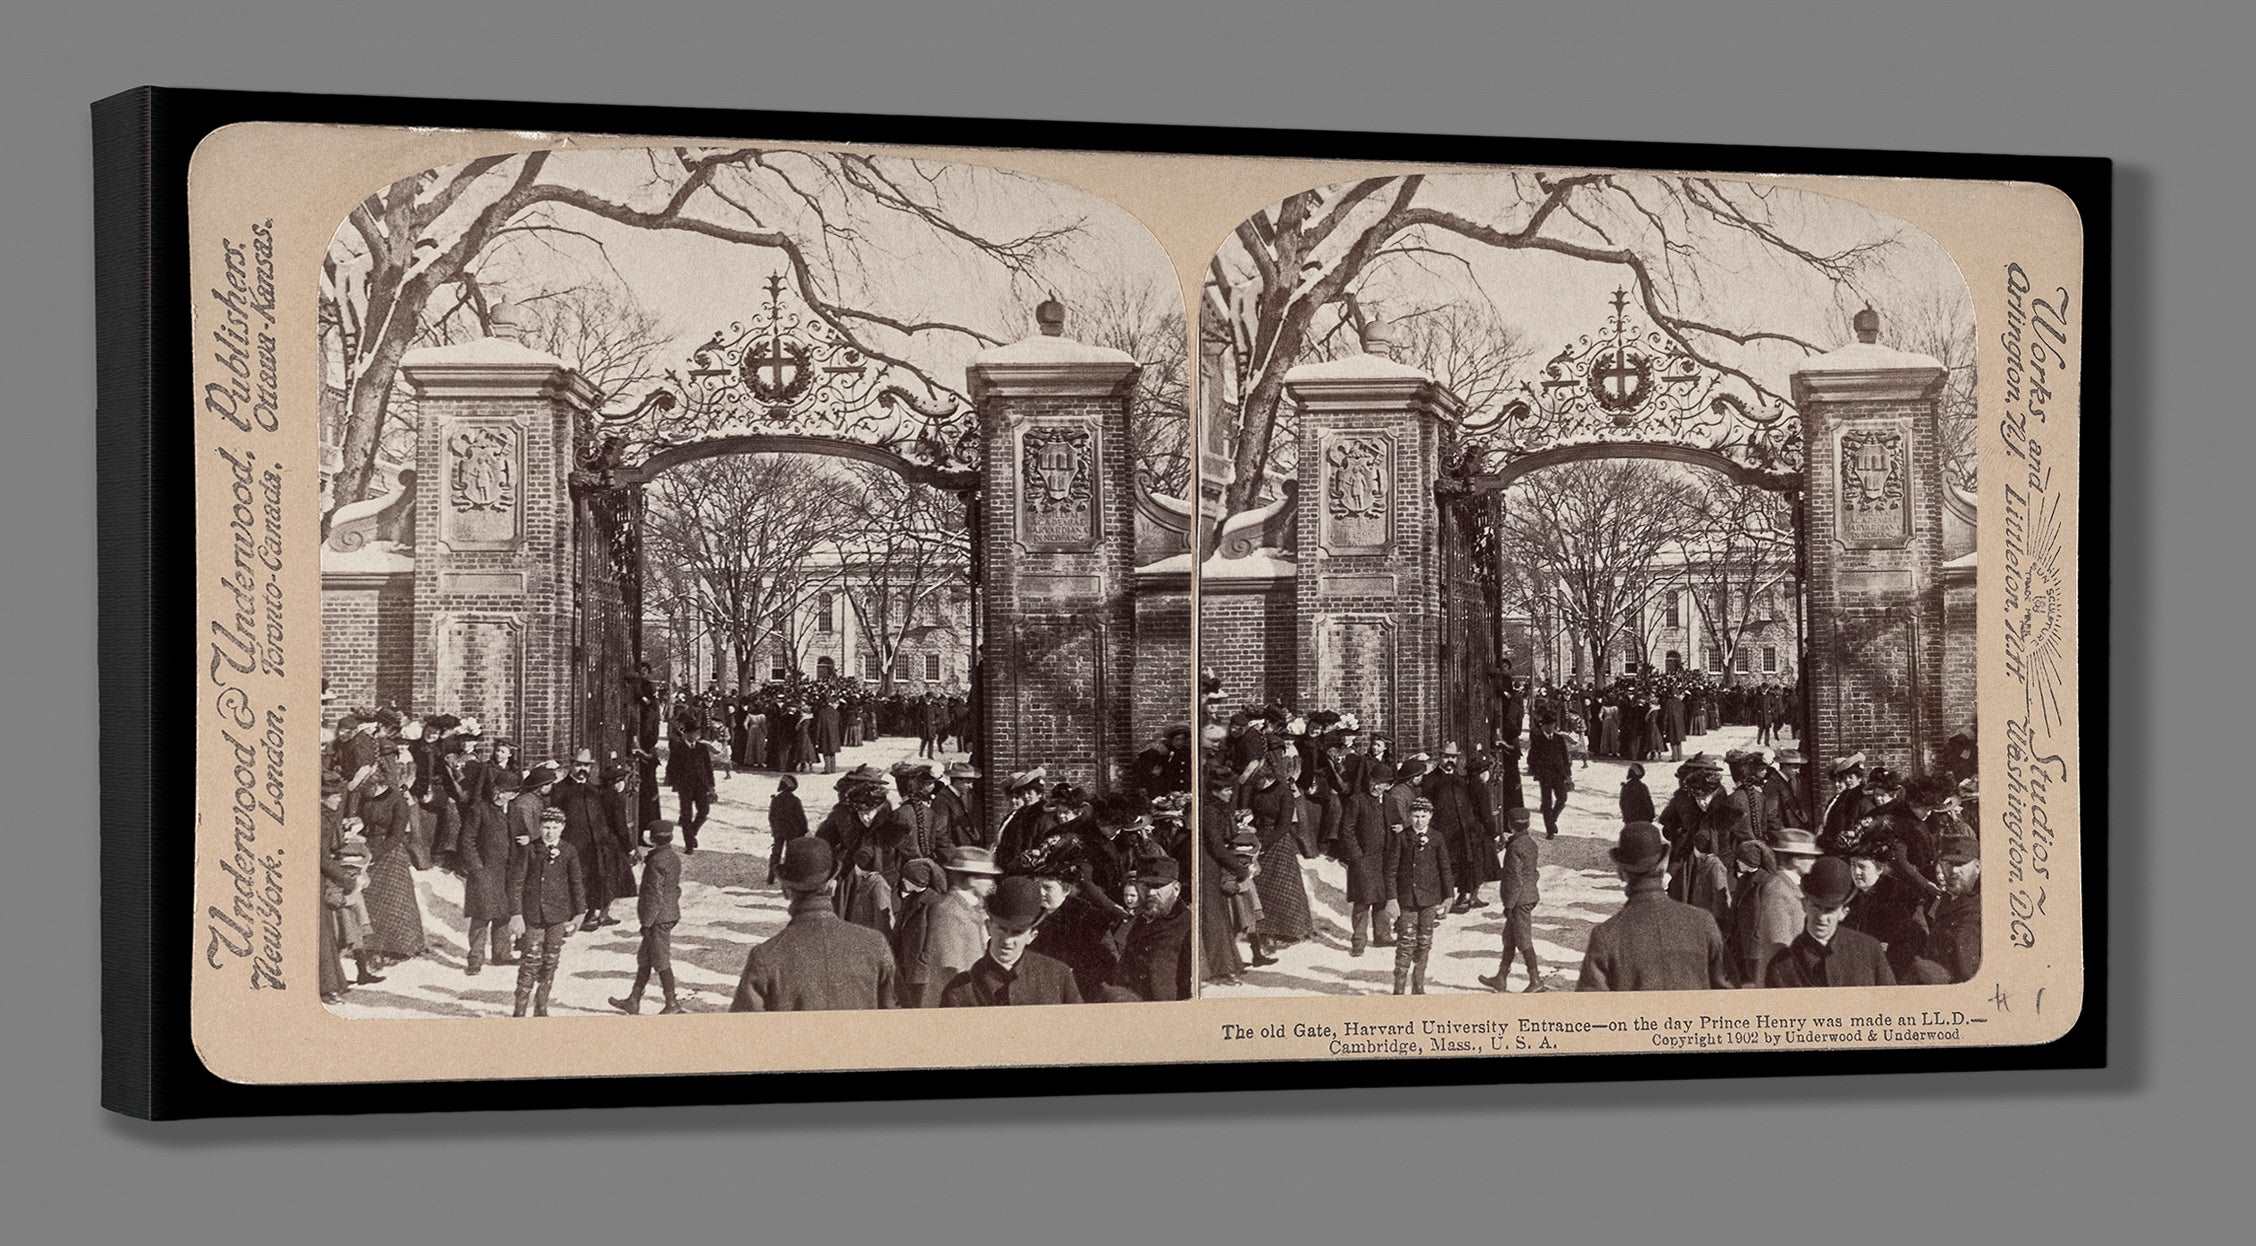 A canvas print mockup of vintage photograph of The Old Gate at Harvard University